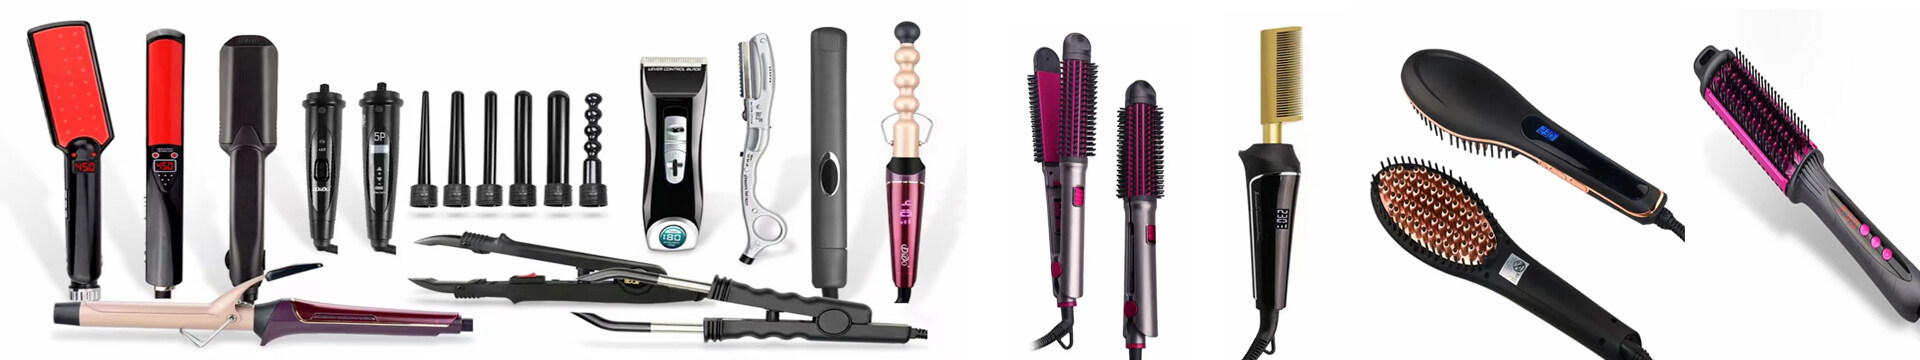 cheap hairdressing tools, professional tools for hairdressers, tools used in hairdressing, professional hairdressing combs, tools for hairdresser